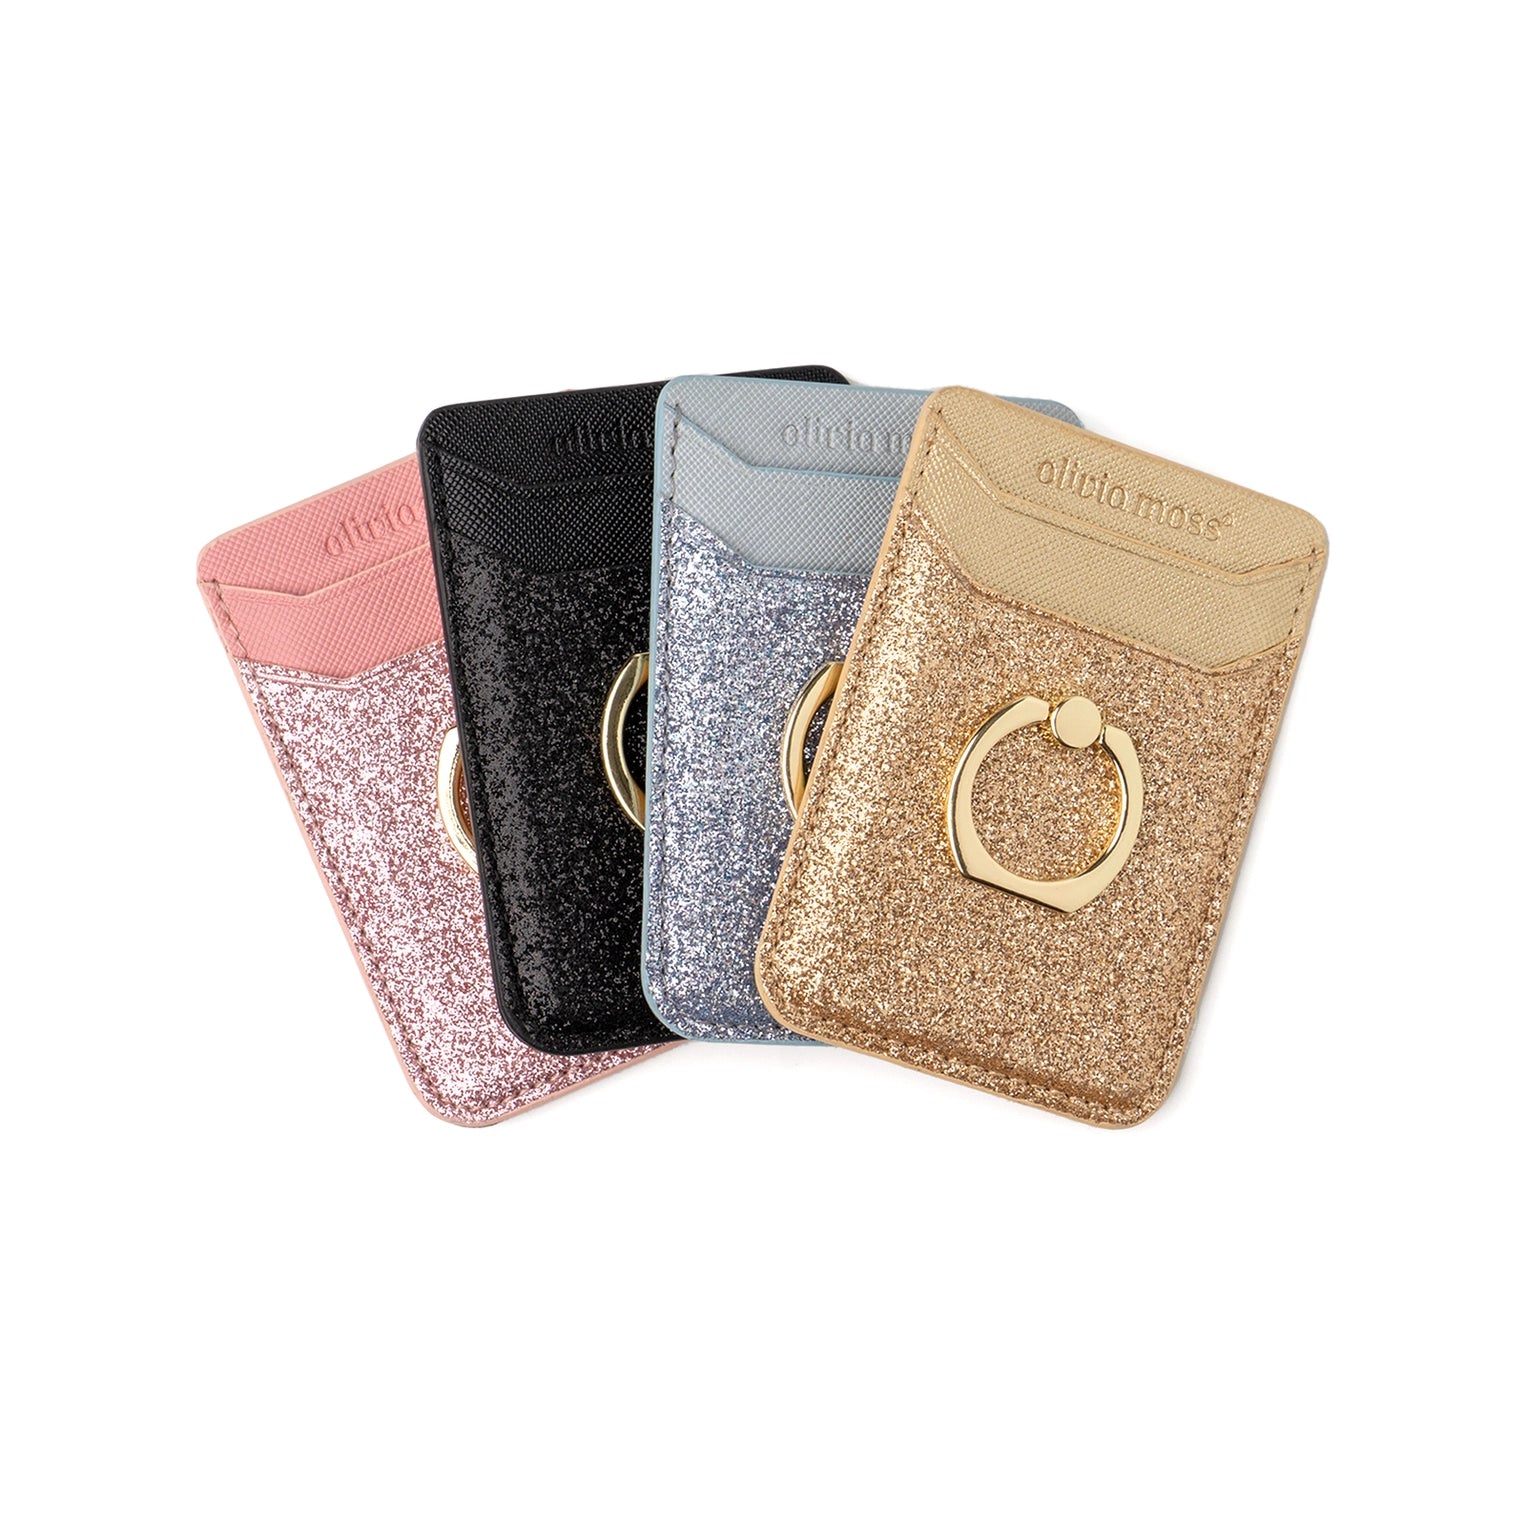 Glitter Bomb Ring Cling Cardholder – Assorted Colors – Sold Individually